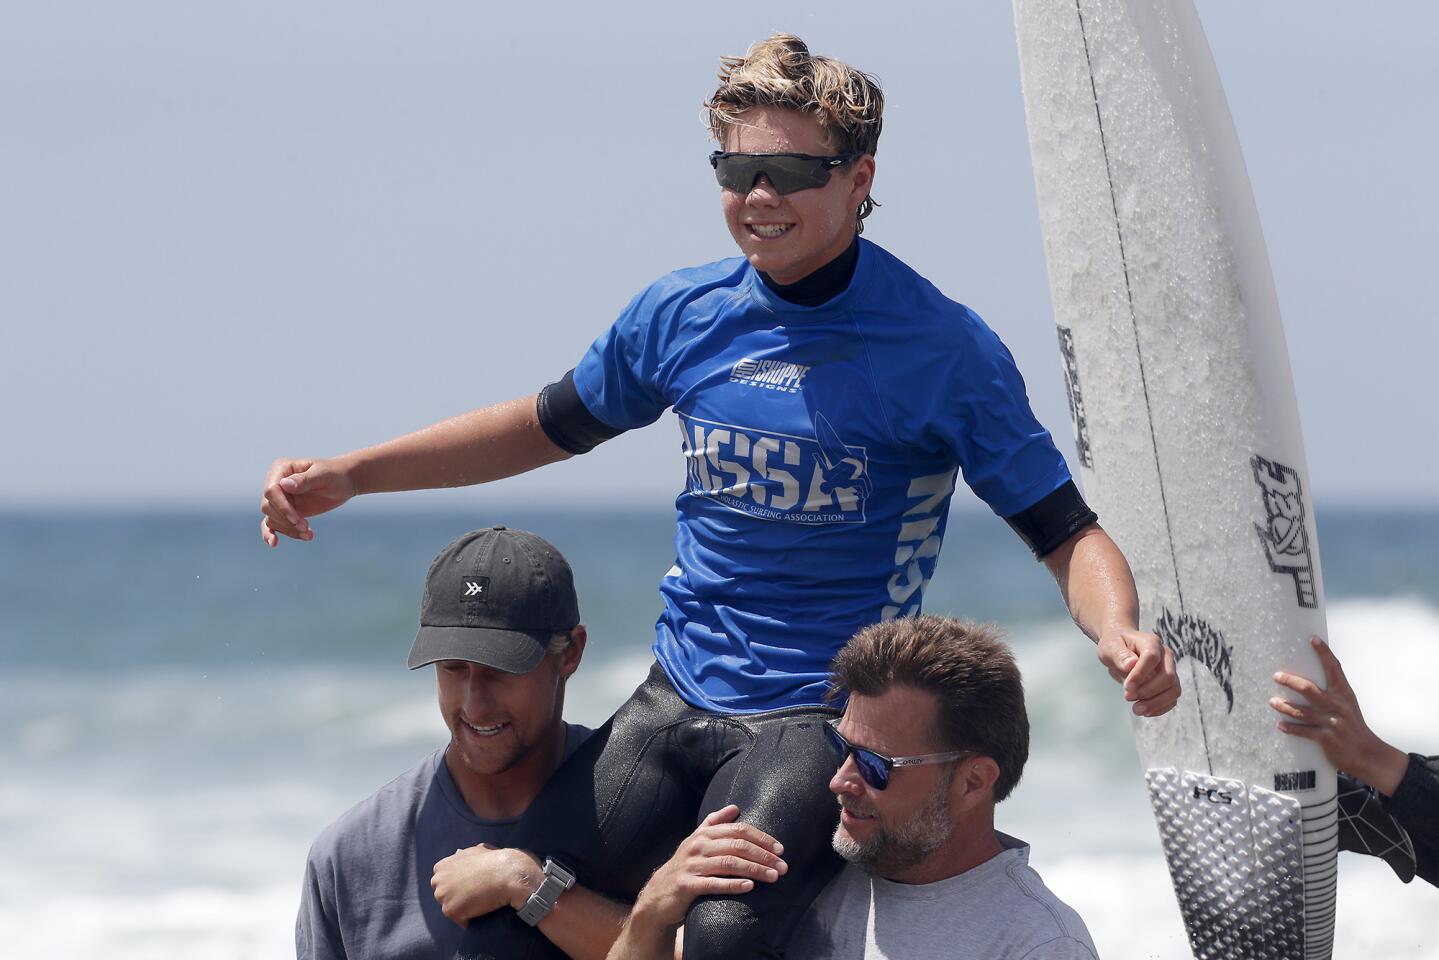 Taj Lindblad of San Clemente celebrates winning the open men's title at the National Scholastic Surfing Assn. National Championships in Huntington Beach on Wednesday.